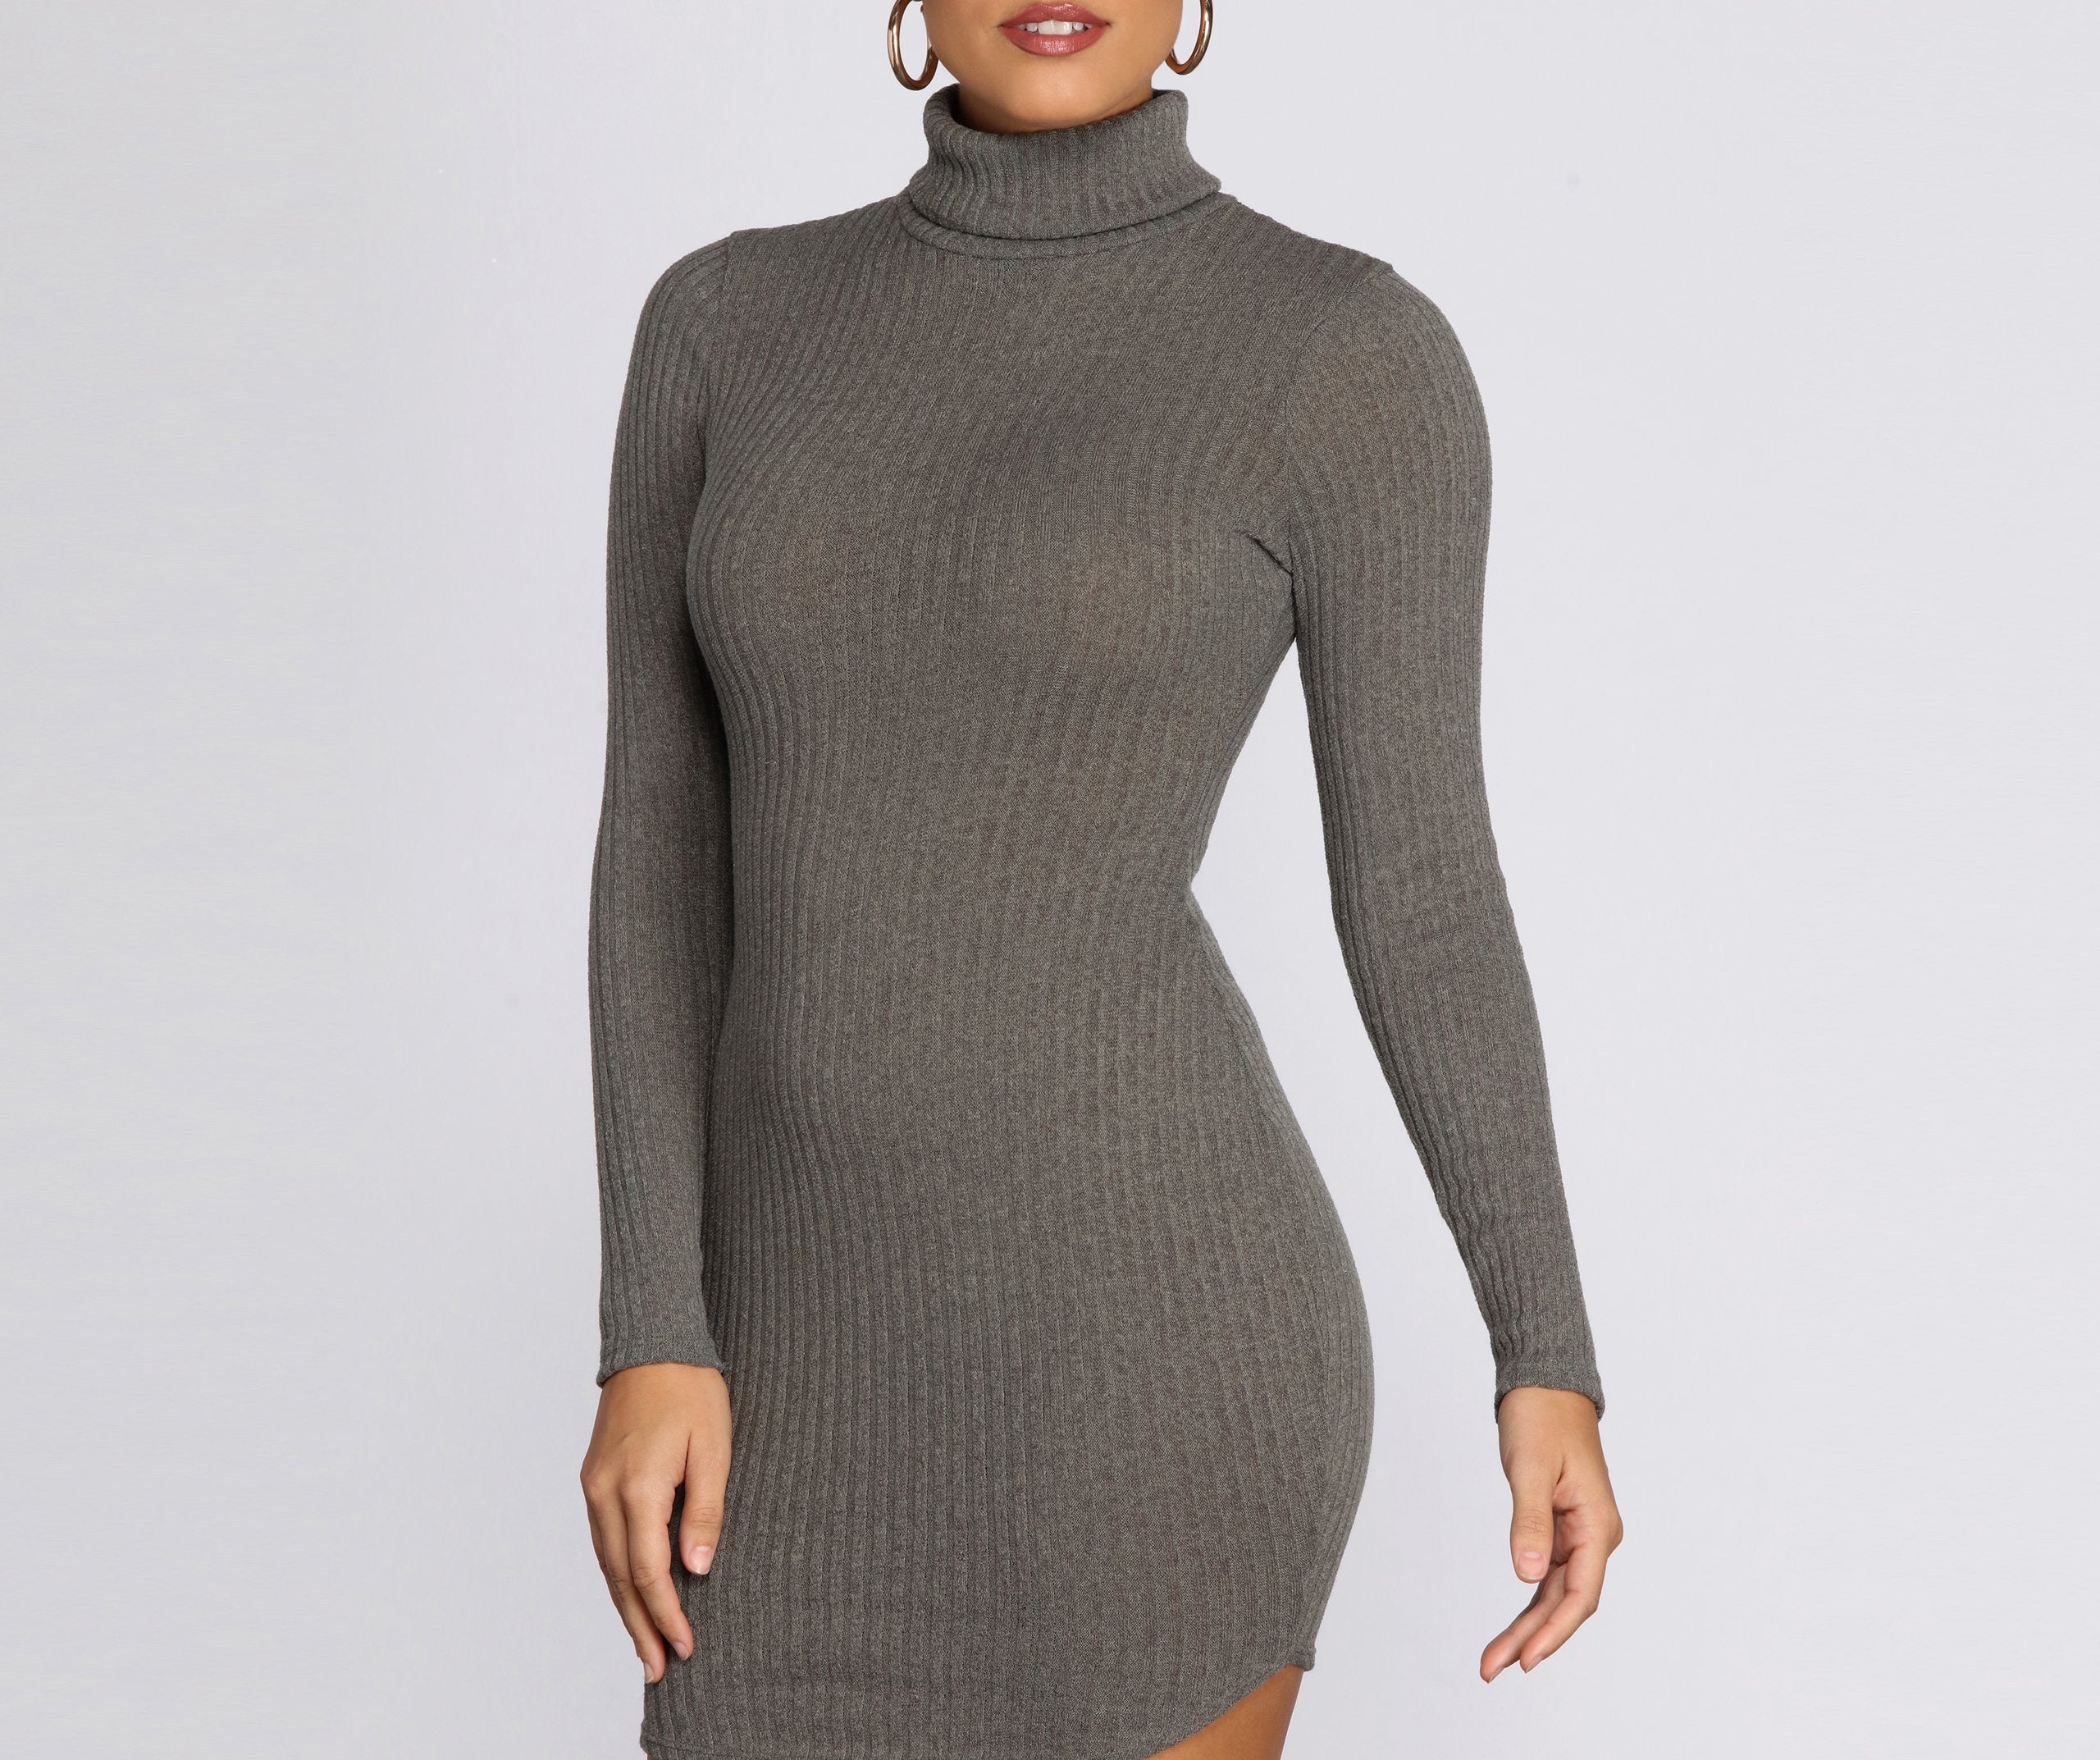 Turtleneck Long Sleeve Ribbed Knit Mini Dress - Lady Occasions